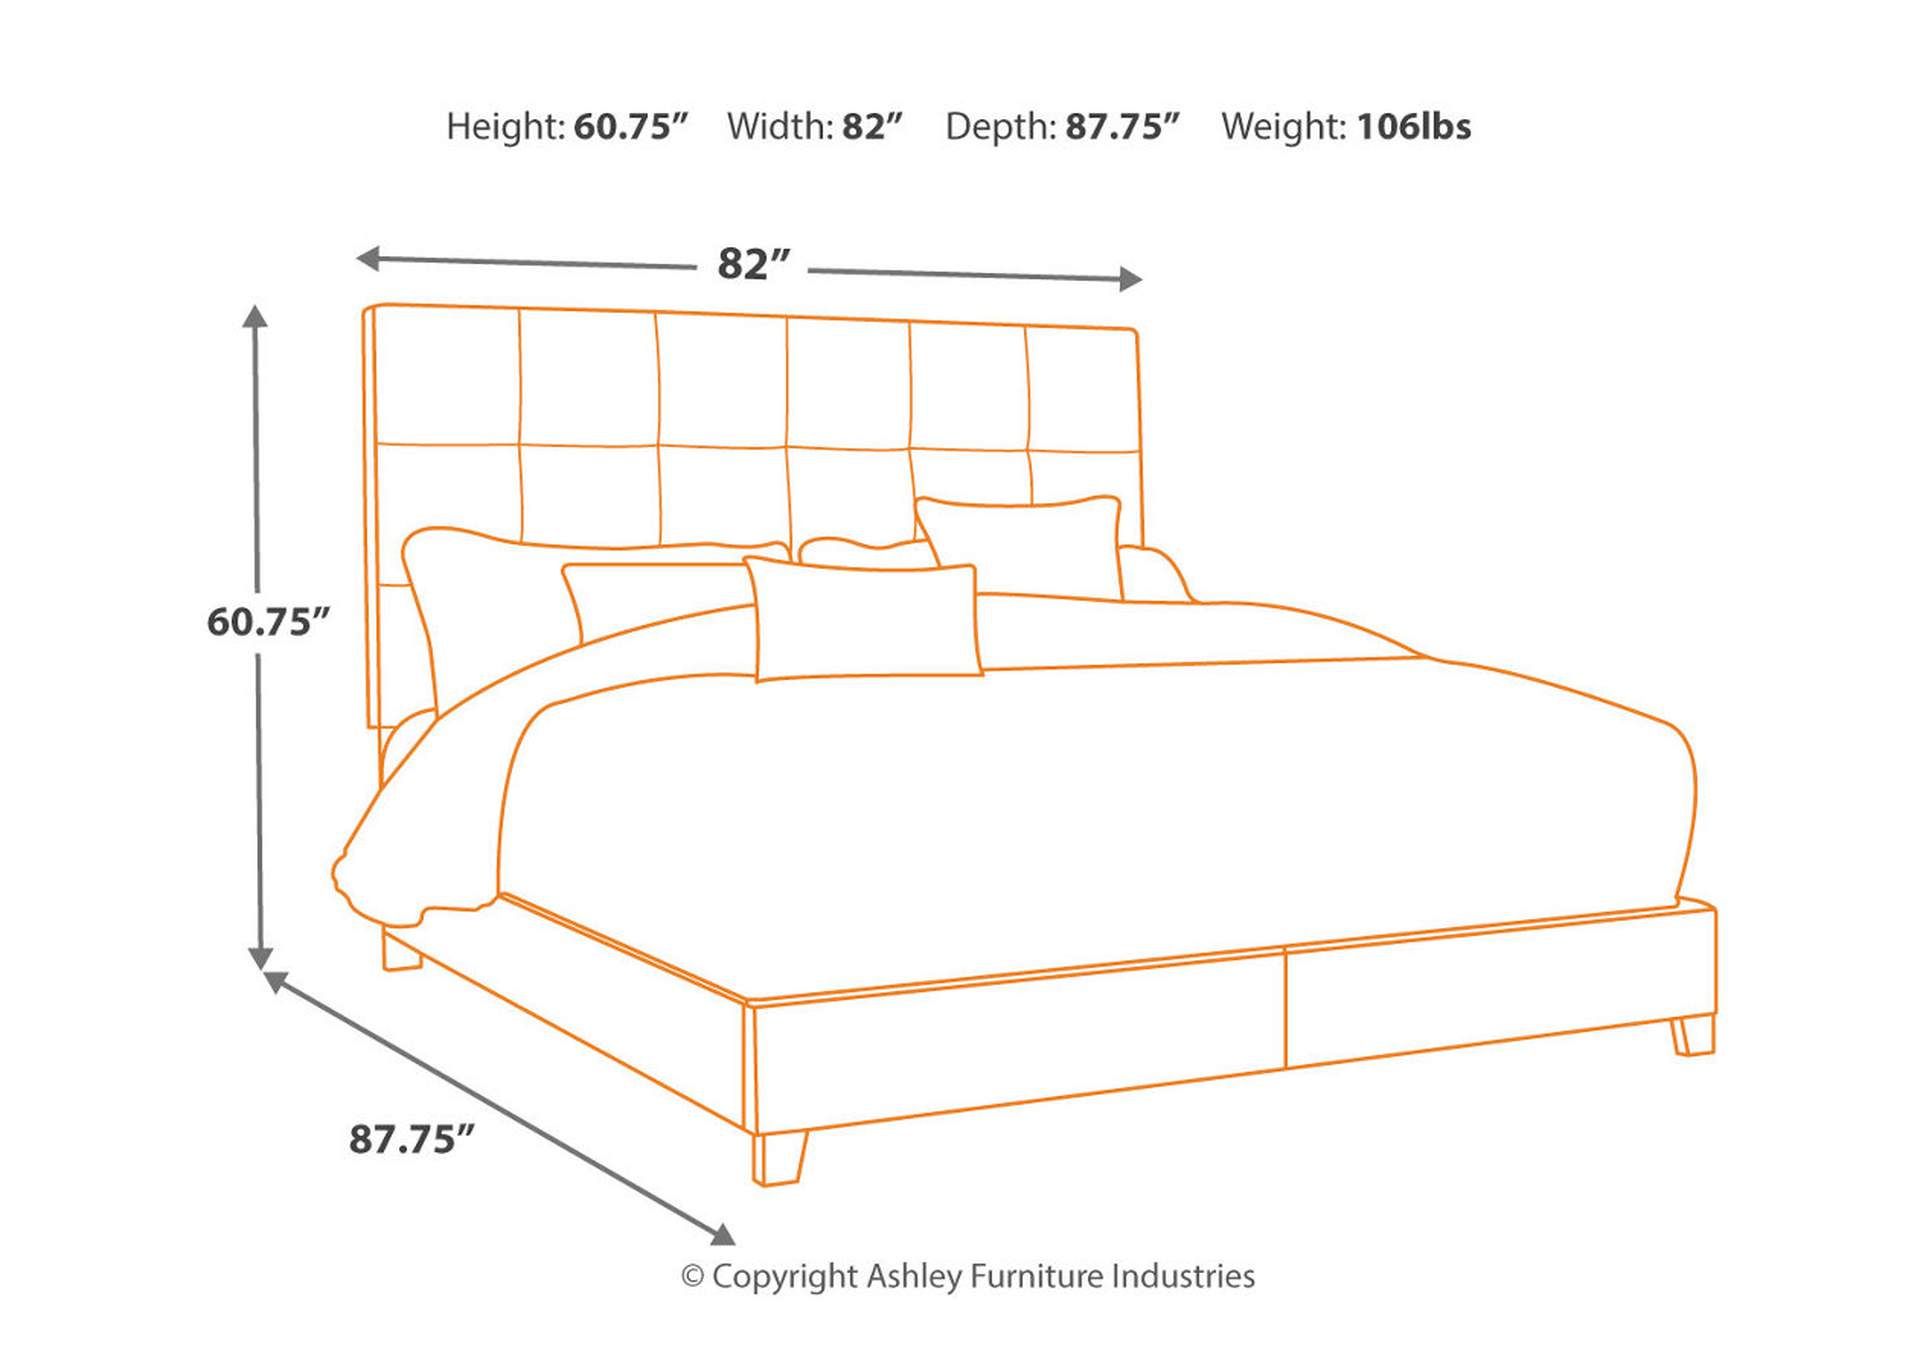 Dolante King Upholstered Bed,Signature Design By Ashley